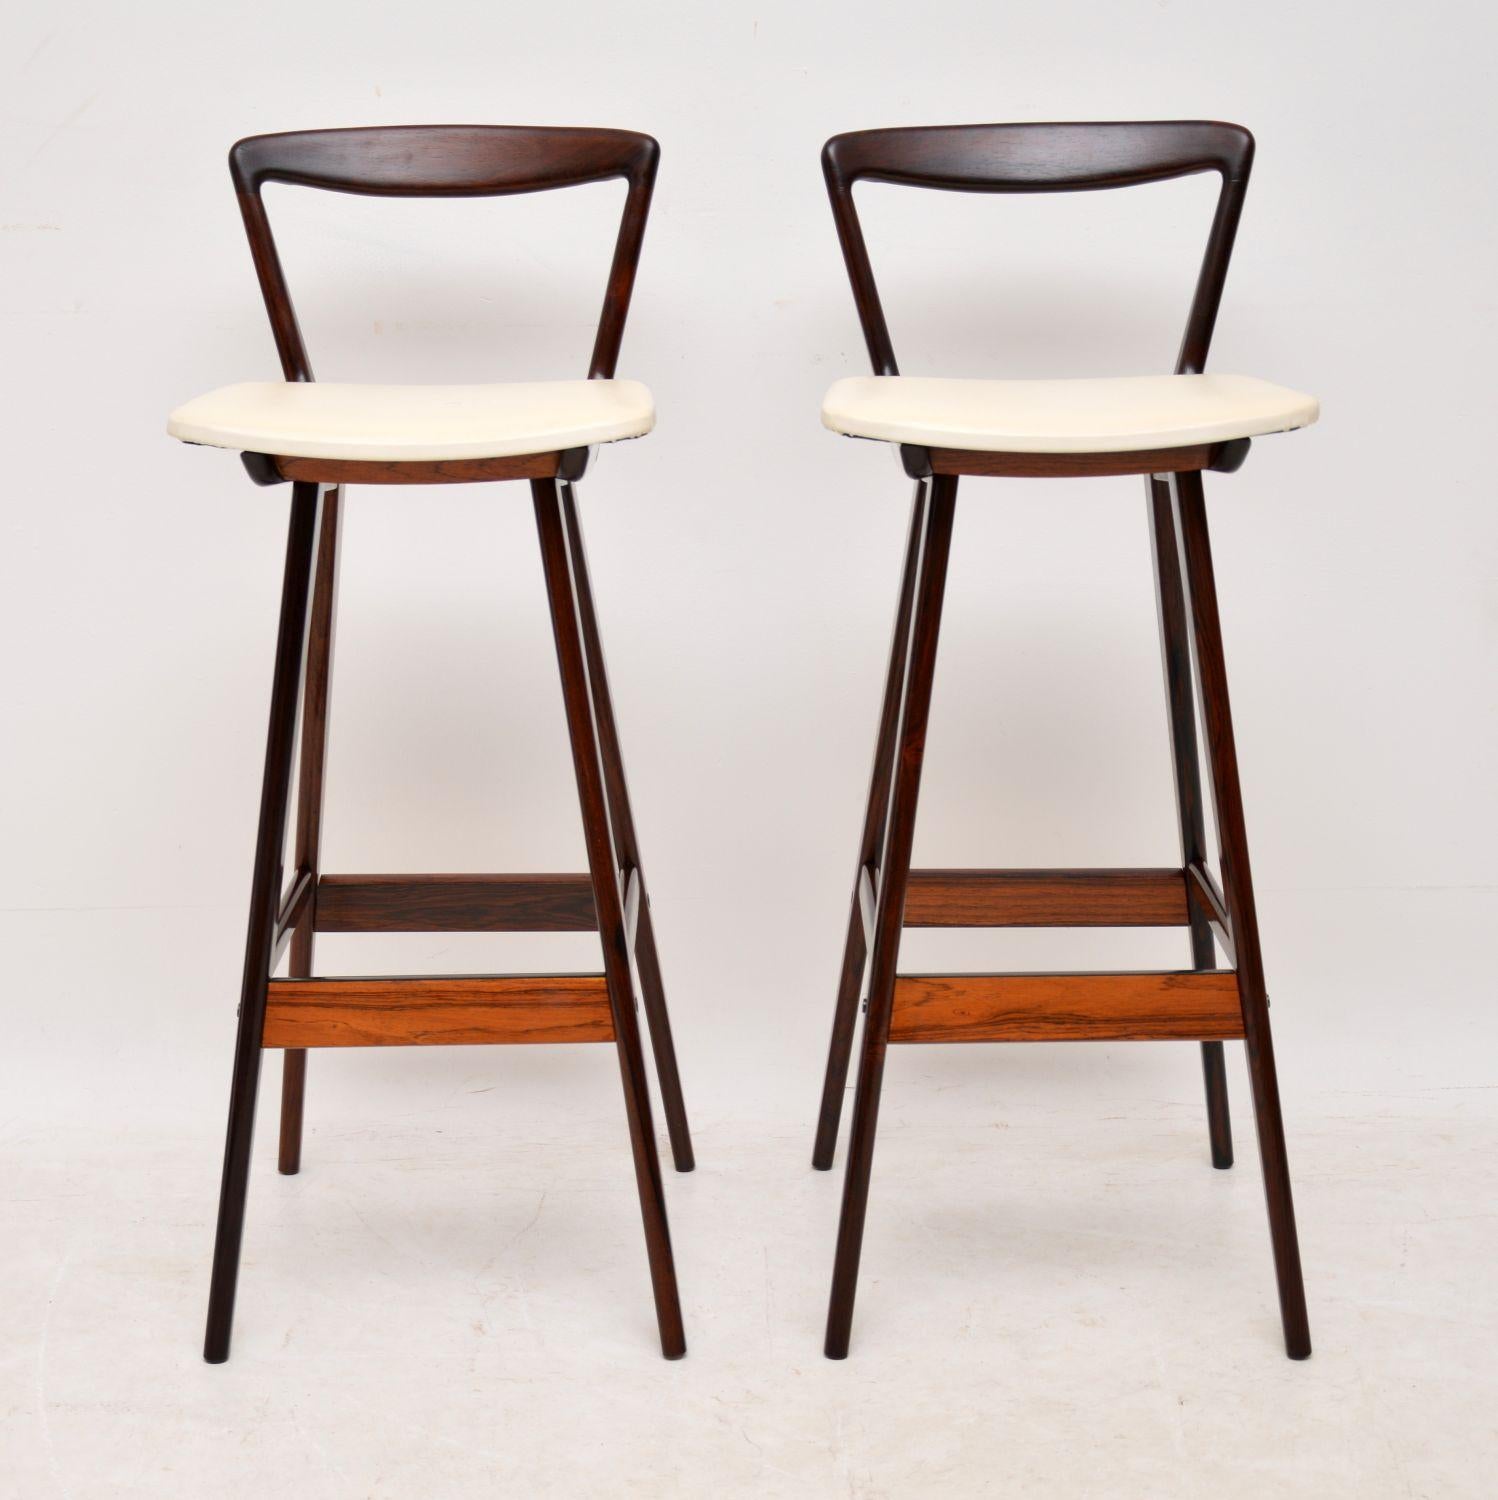 A stunning and very rare pair of Danish bar stools, these were designed by Henry Rosengren Hansen and were made in the 1960s. The previous owner imported these from Canada in the 1960s, then kept them flat packed and boxed in an attic for the past